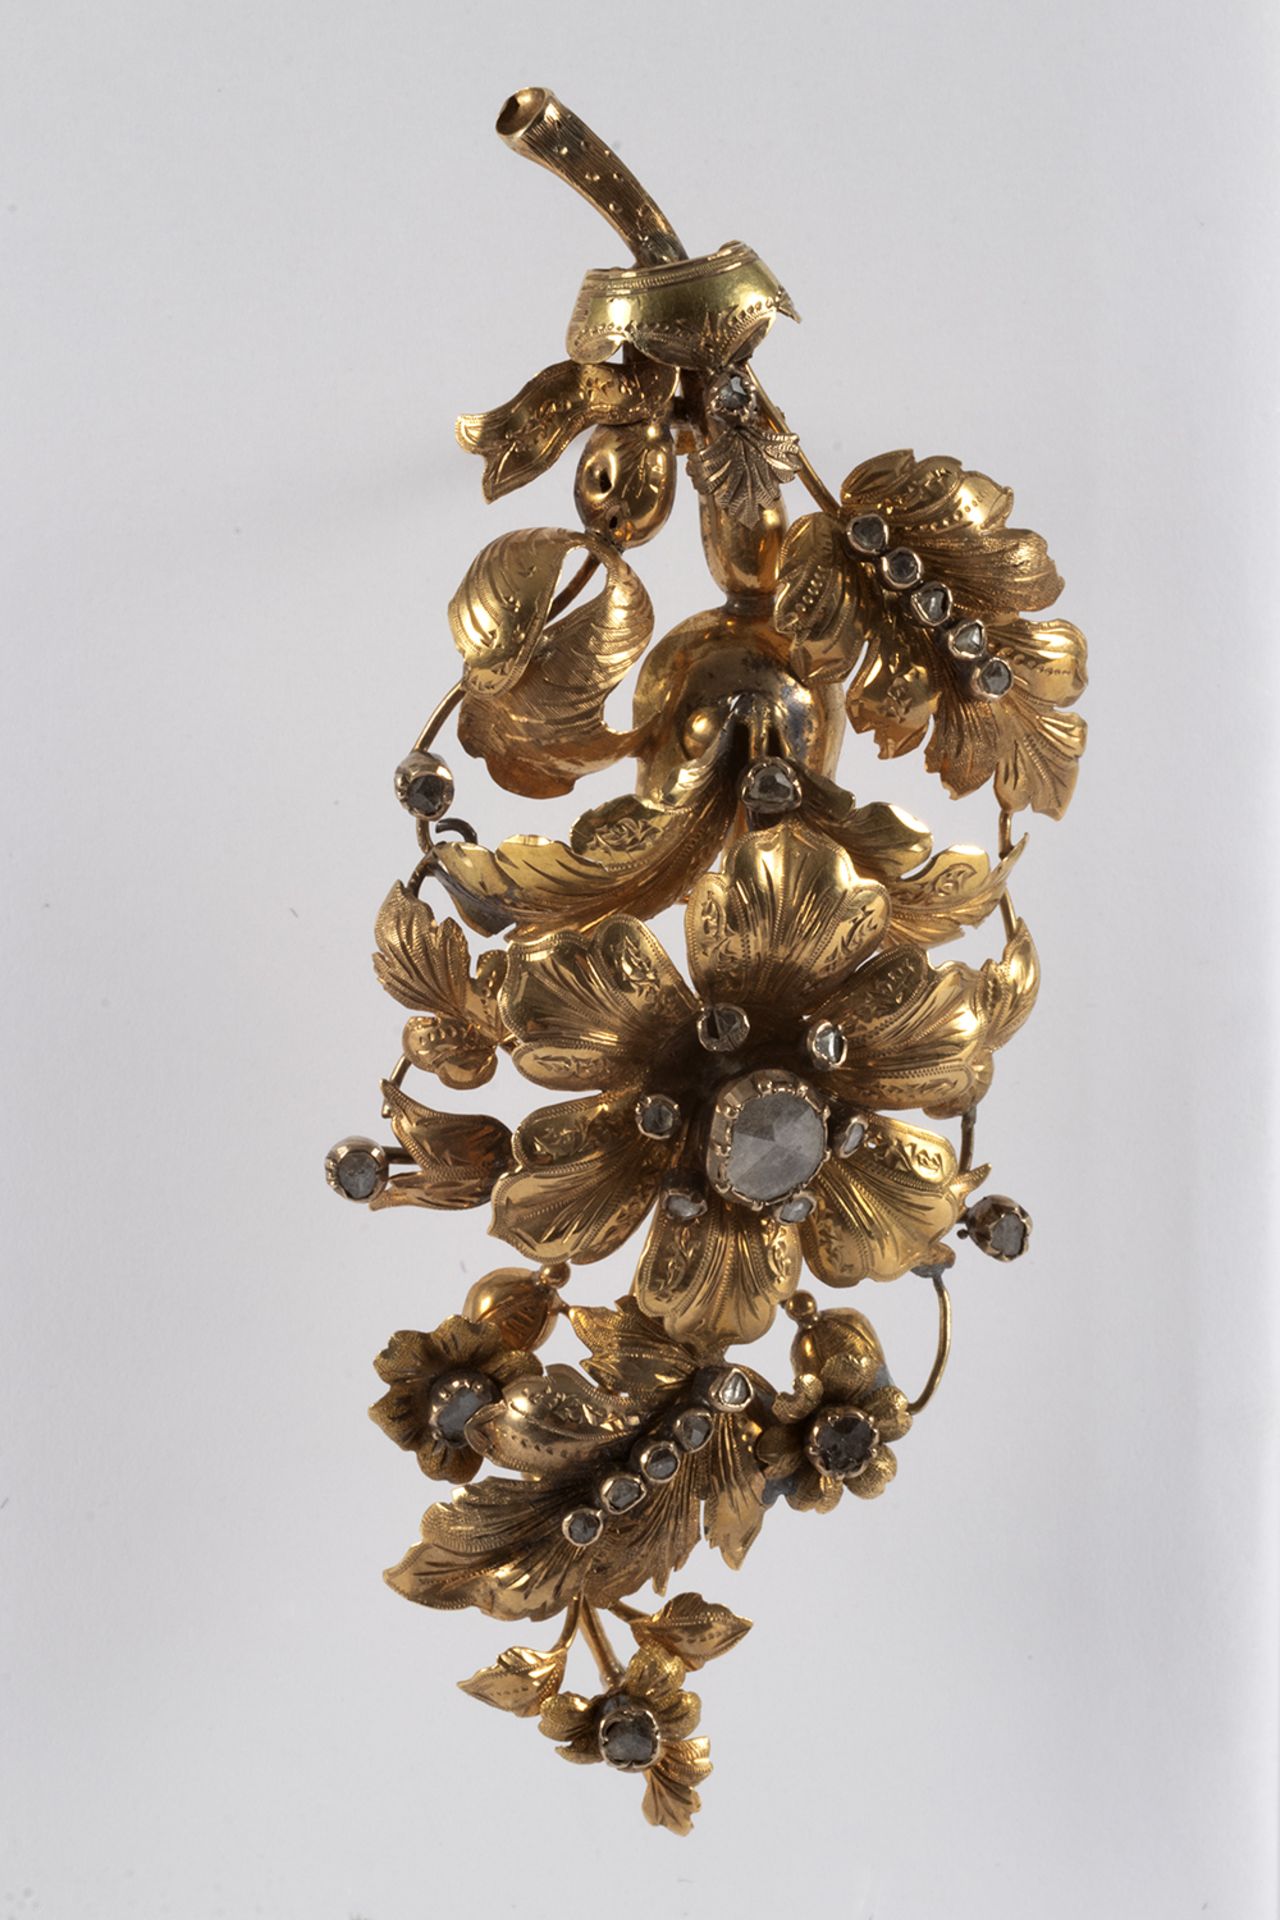 Elizabethan floral brooch in gold and 3/3 rose cut diamonds.